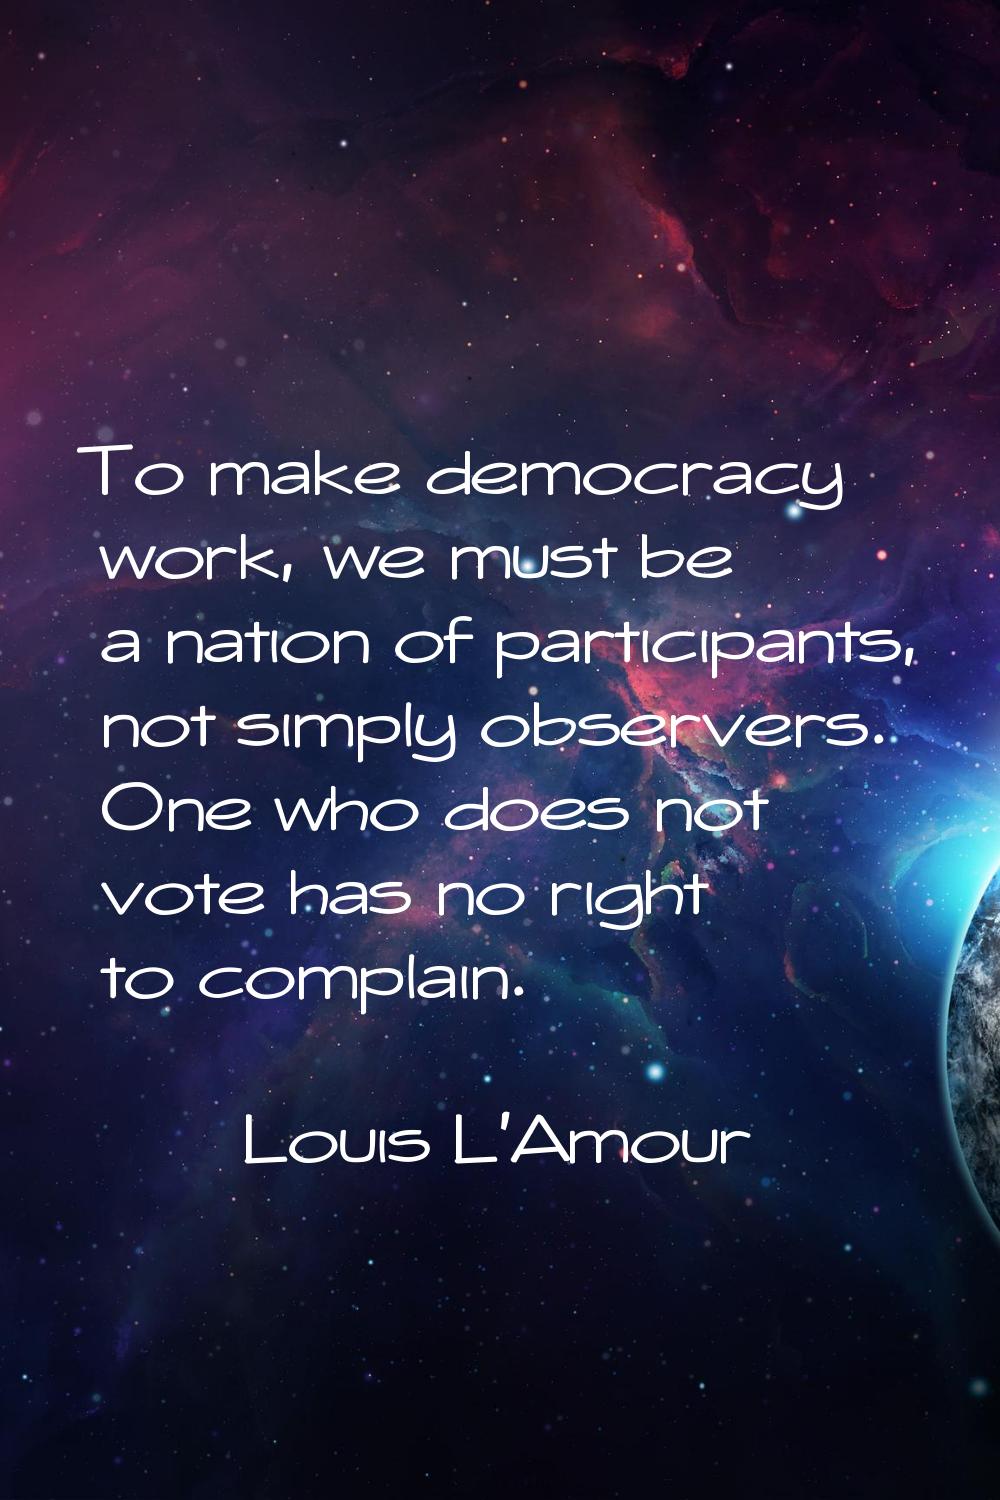 To make democracy work, we must be a nation of participants, not simply observers. One who does not